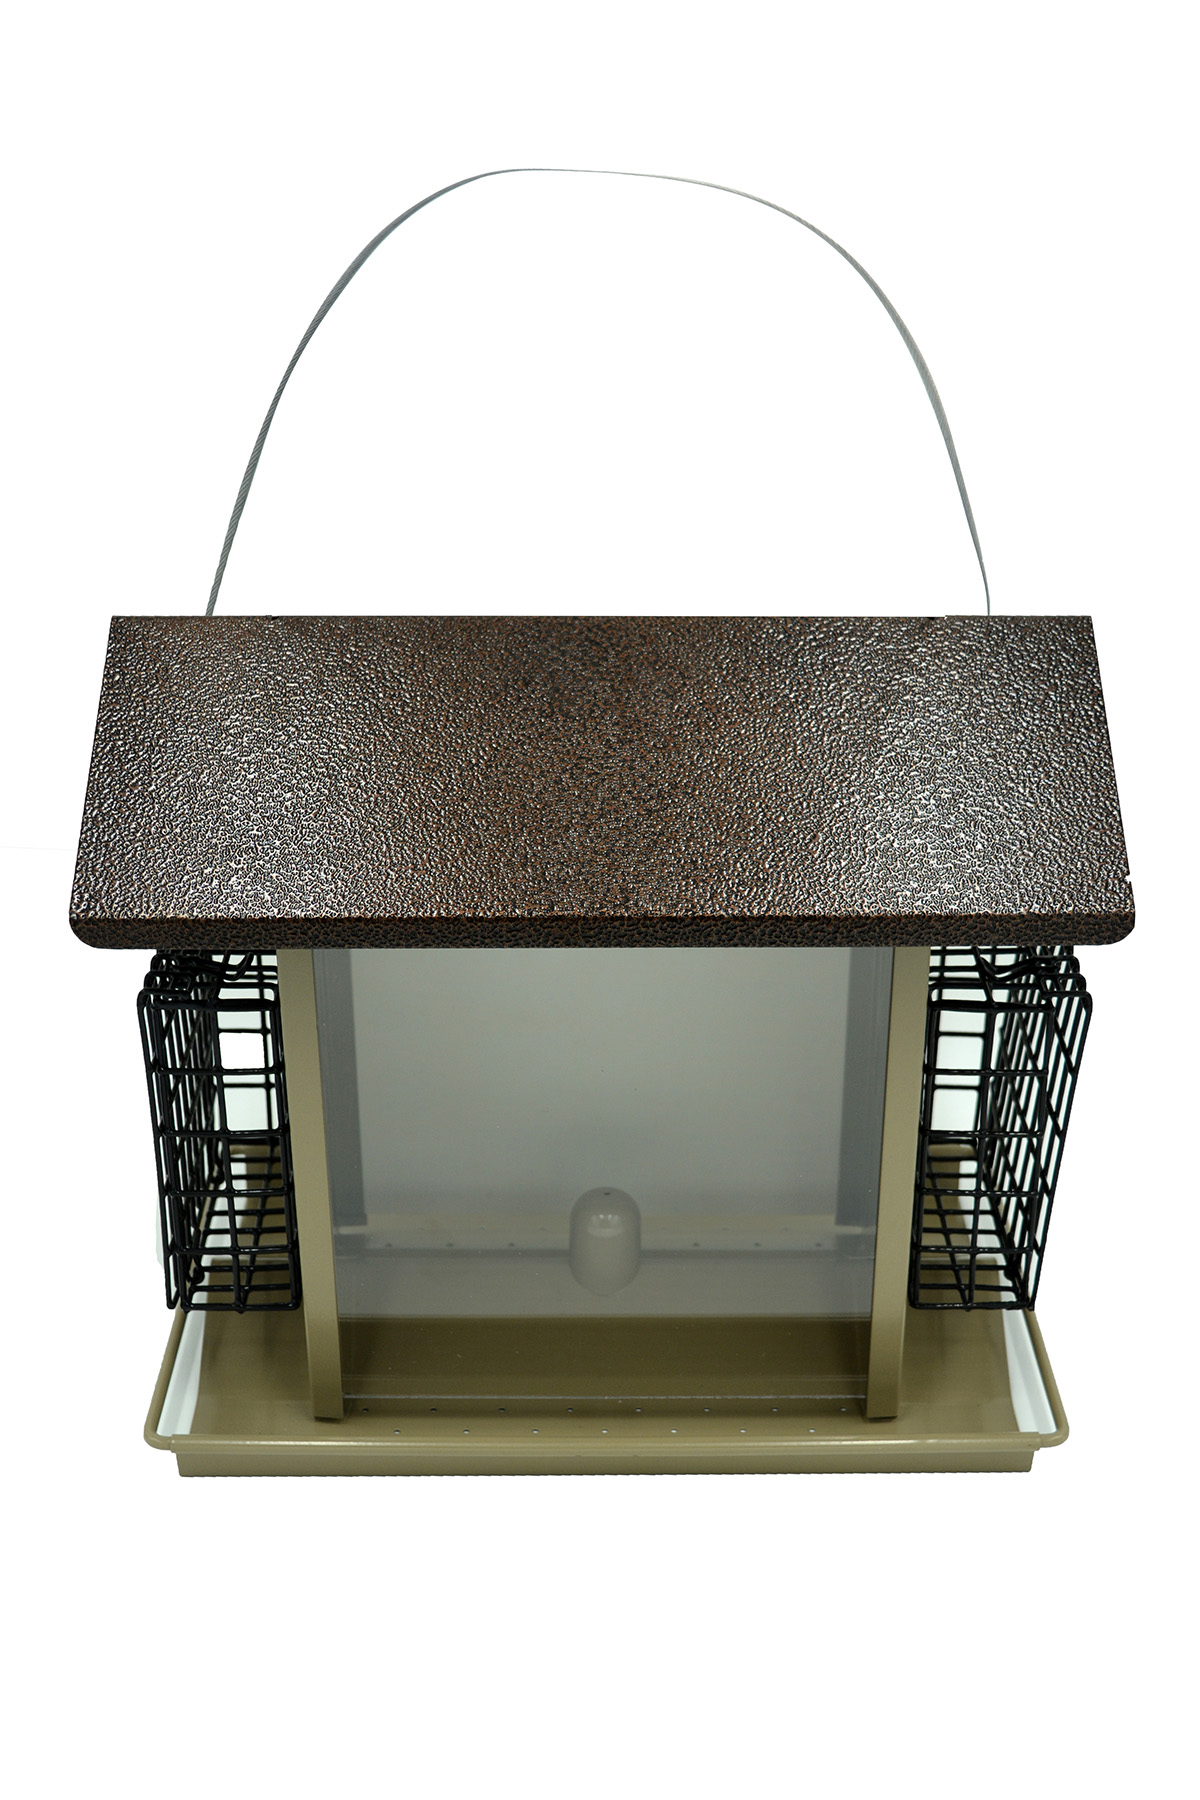 Large Bird Hopper Feeder Z38073 6.3 qt Capacity, 9.41 x 13-1/2 x 8.27 inches, Hammered Copper